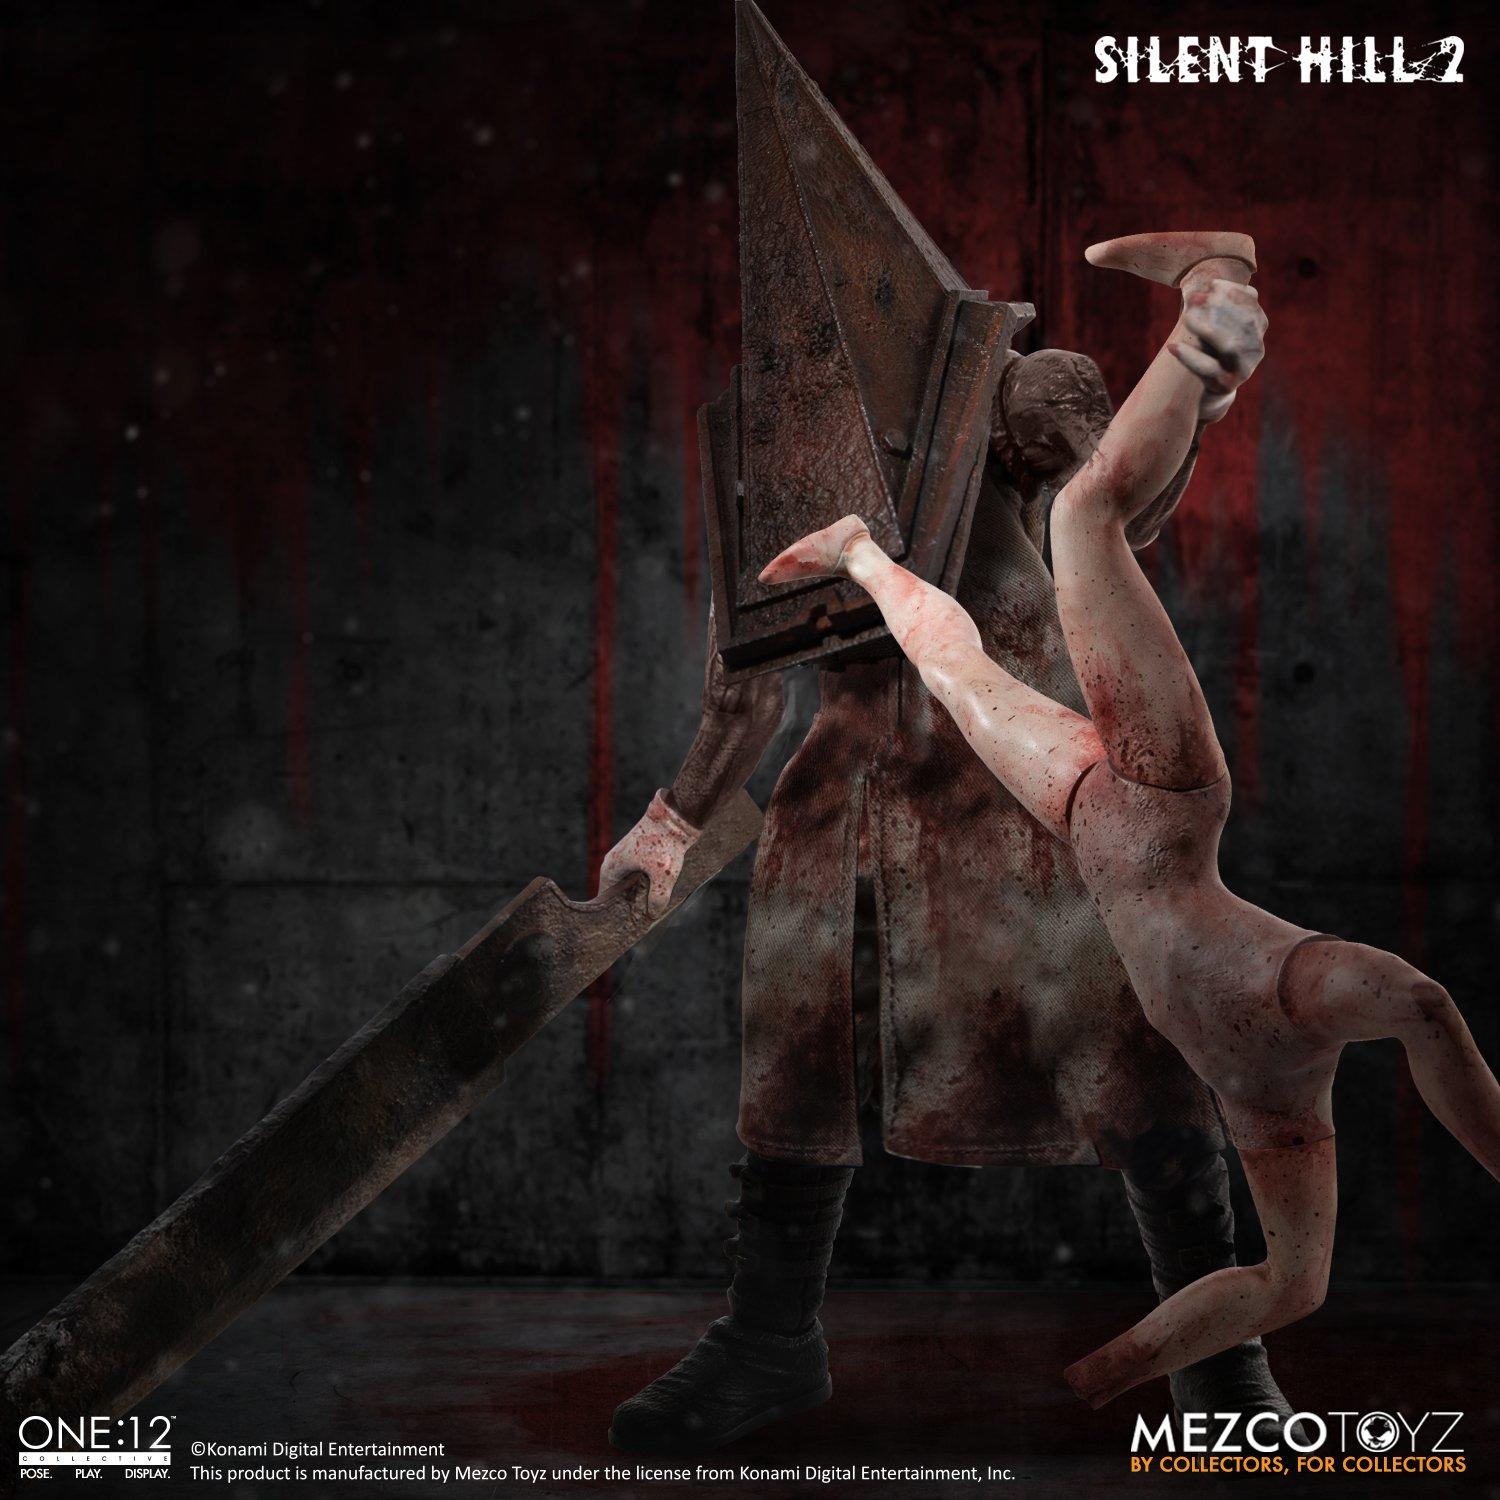 Mezco One:12 Collective Pyramid Head Silent Hill 2 Action Figure Review 